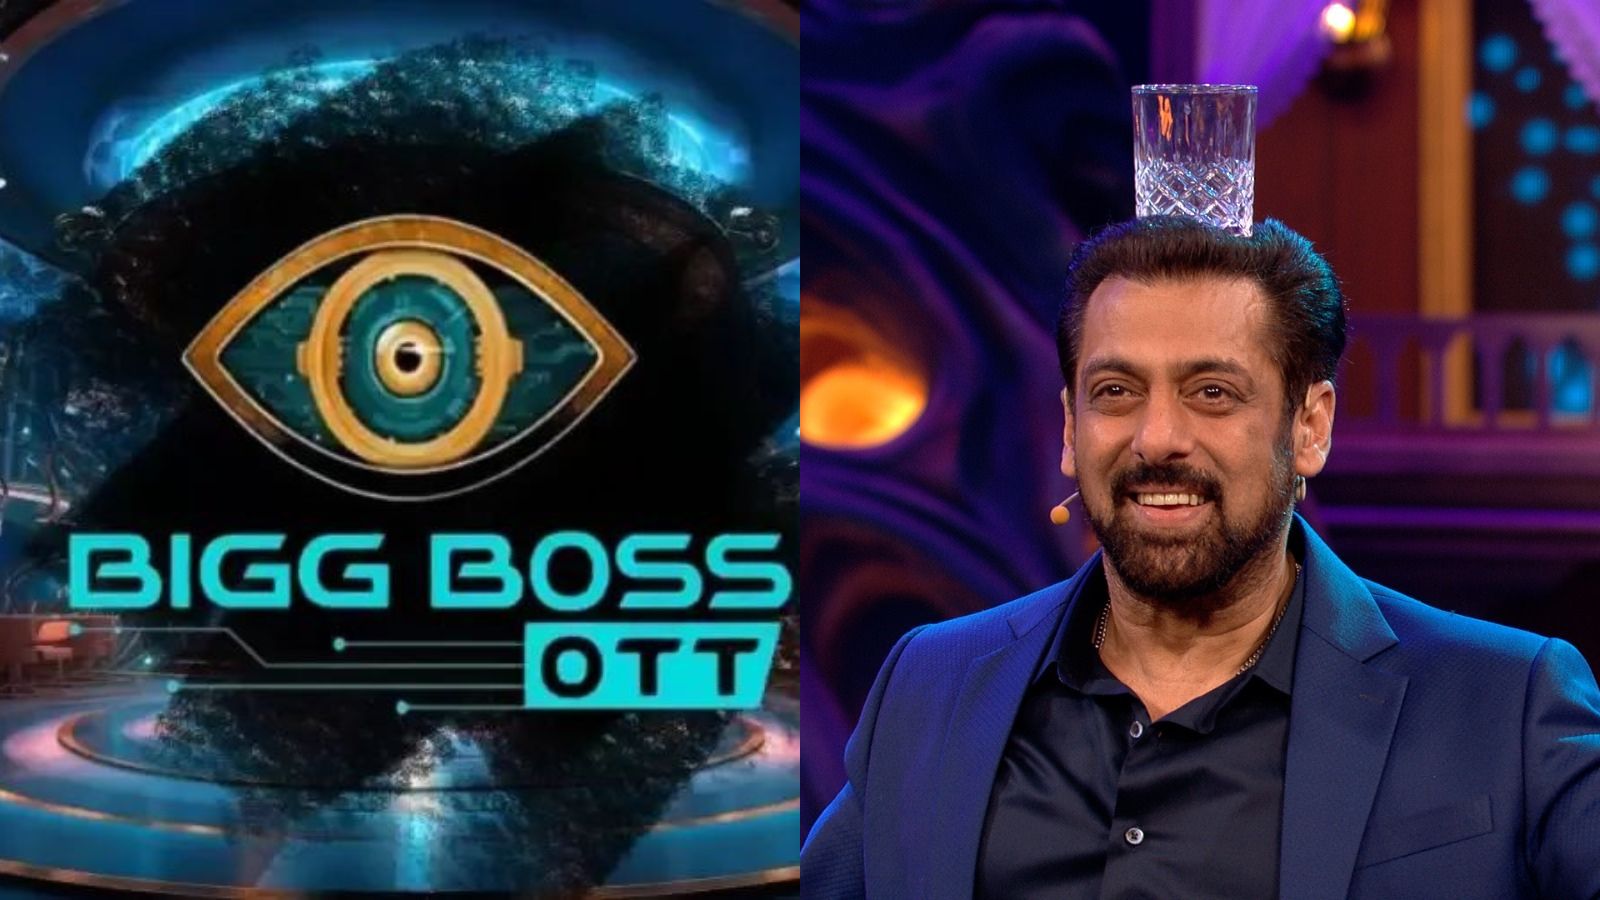 android, exclusive: bigg boss ott 3 not happening this year